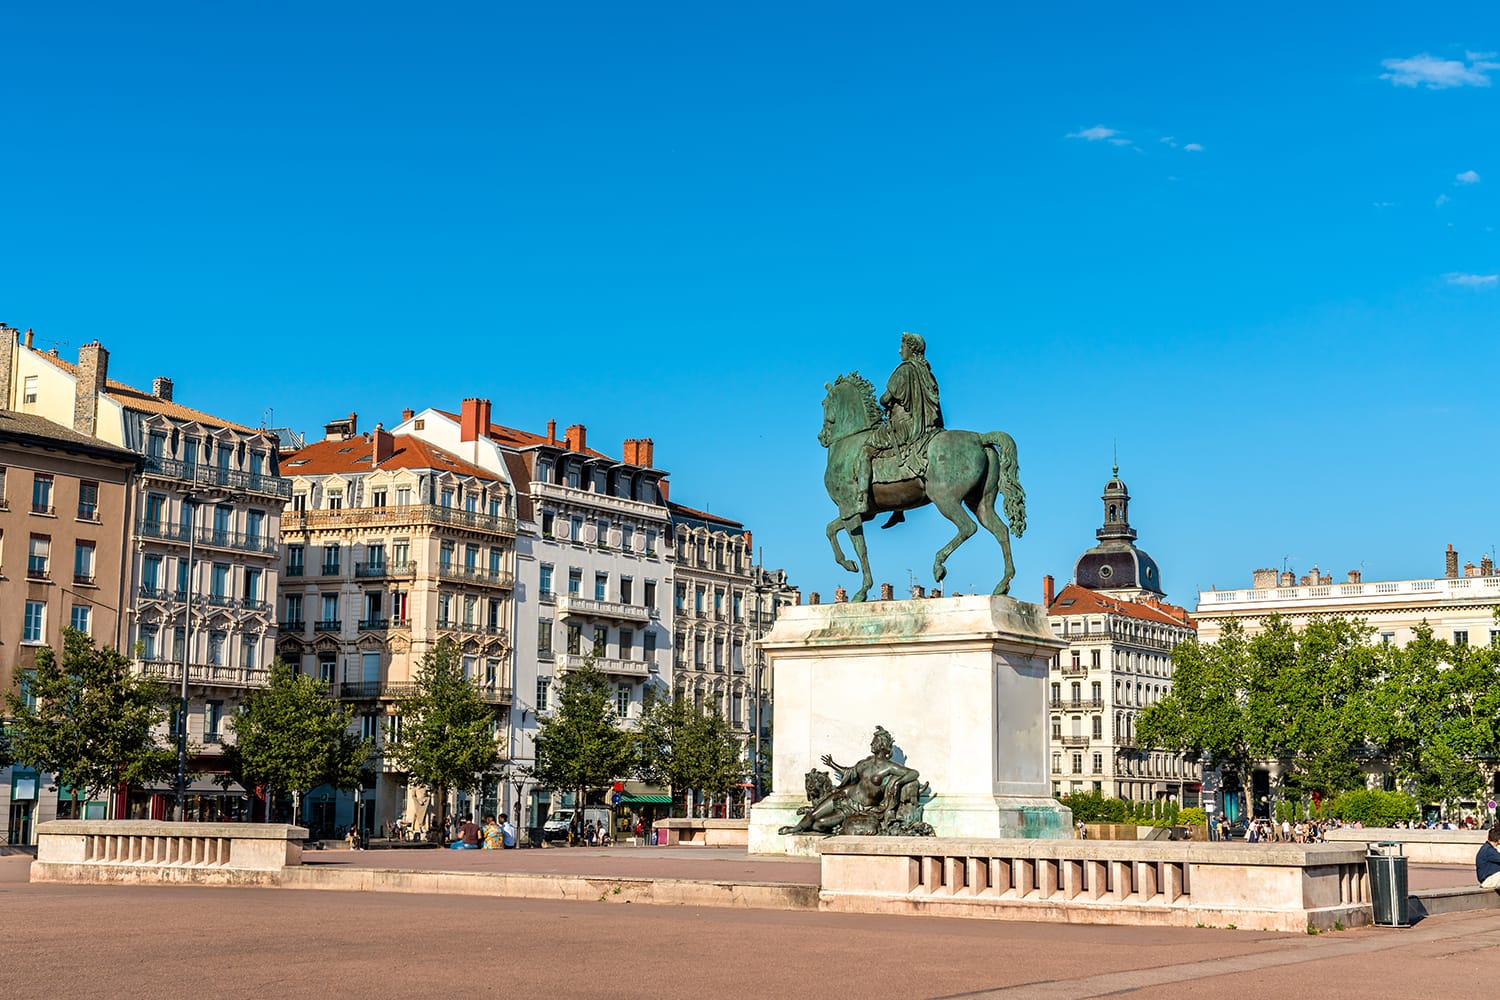 Equestrian statue of Louis XIV on Bellecour Square in Lyon, France